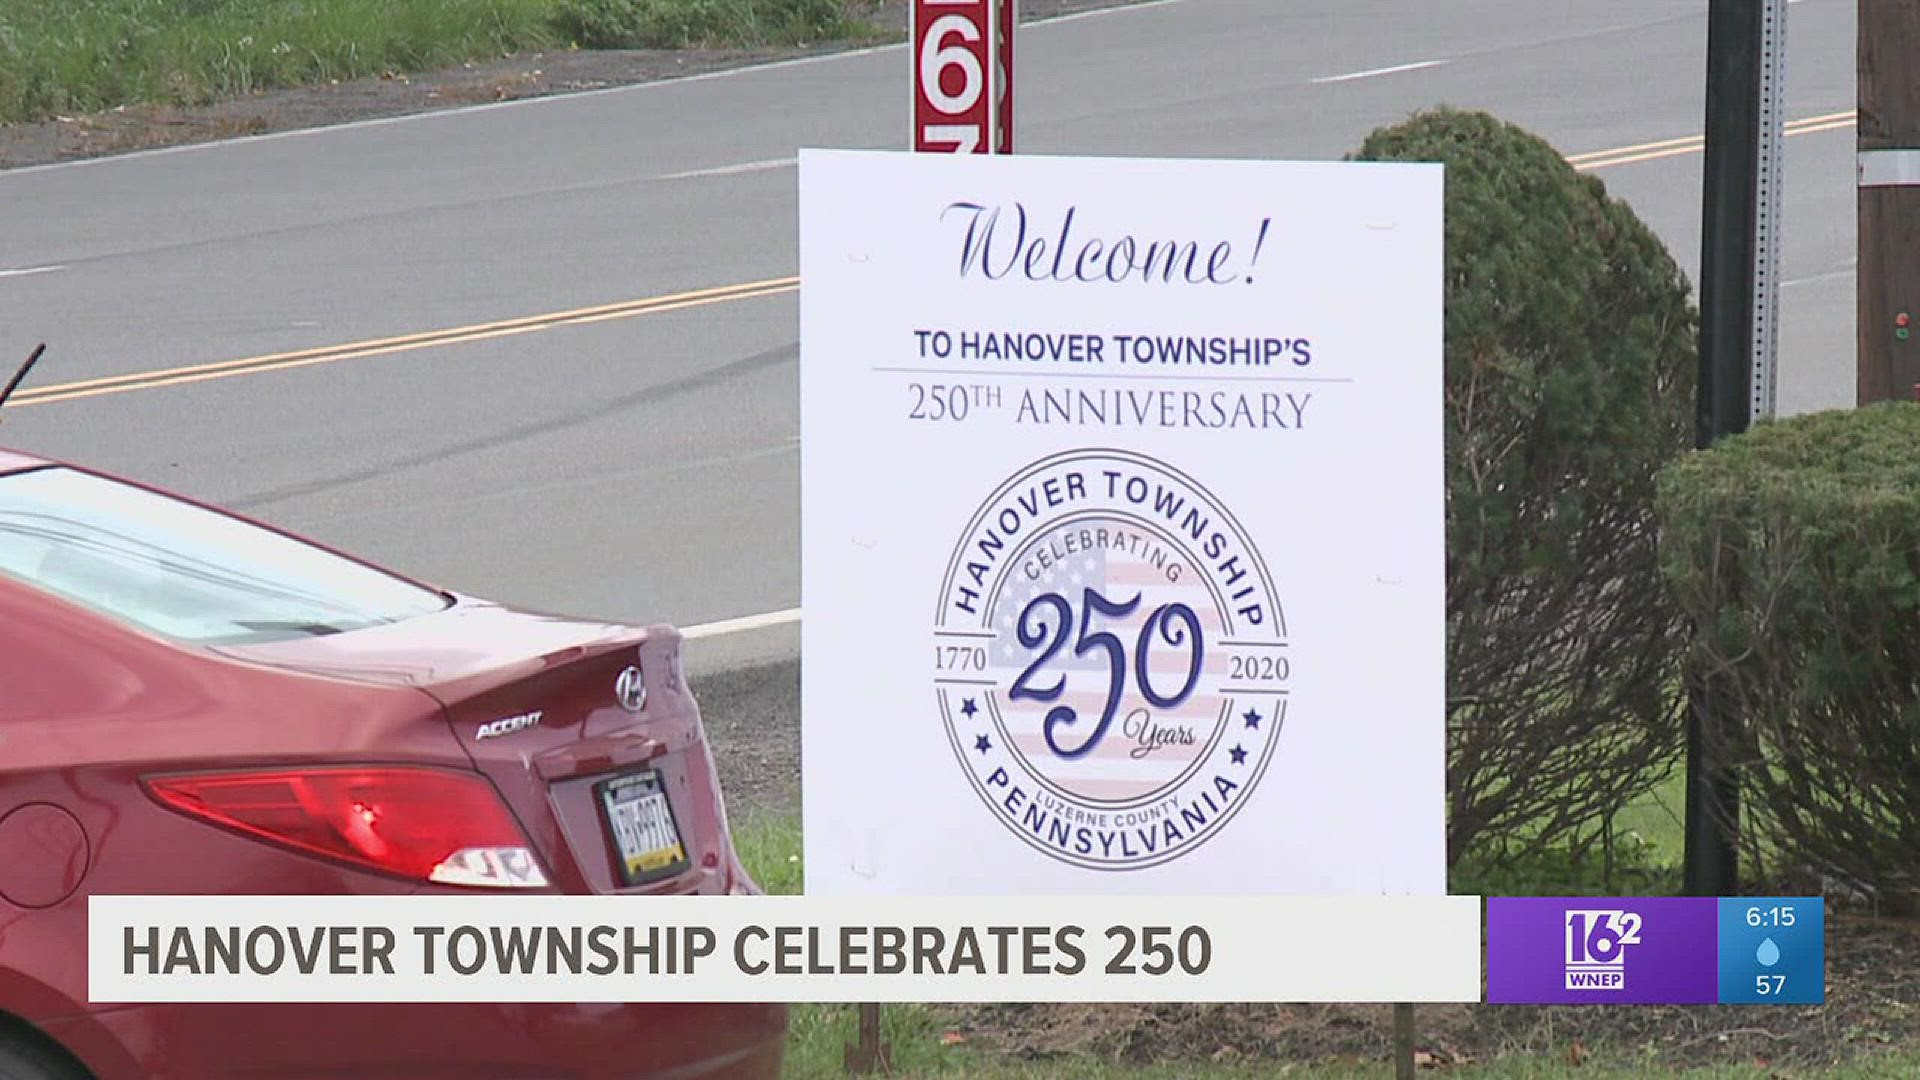 Hanover Township celebrated 250 years, one year later.